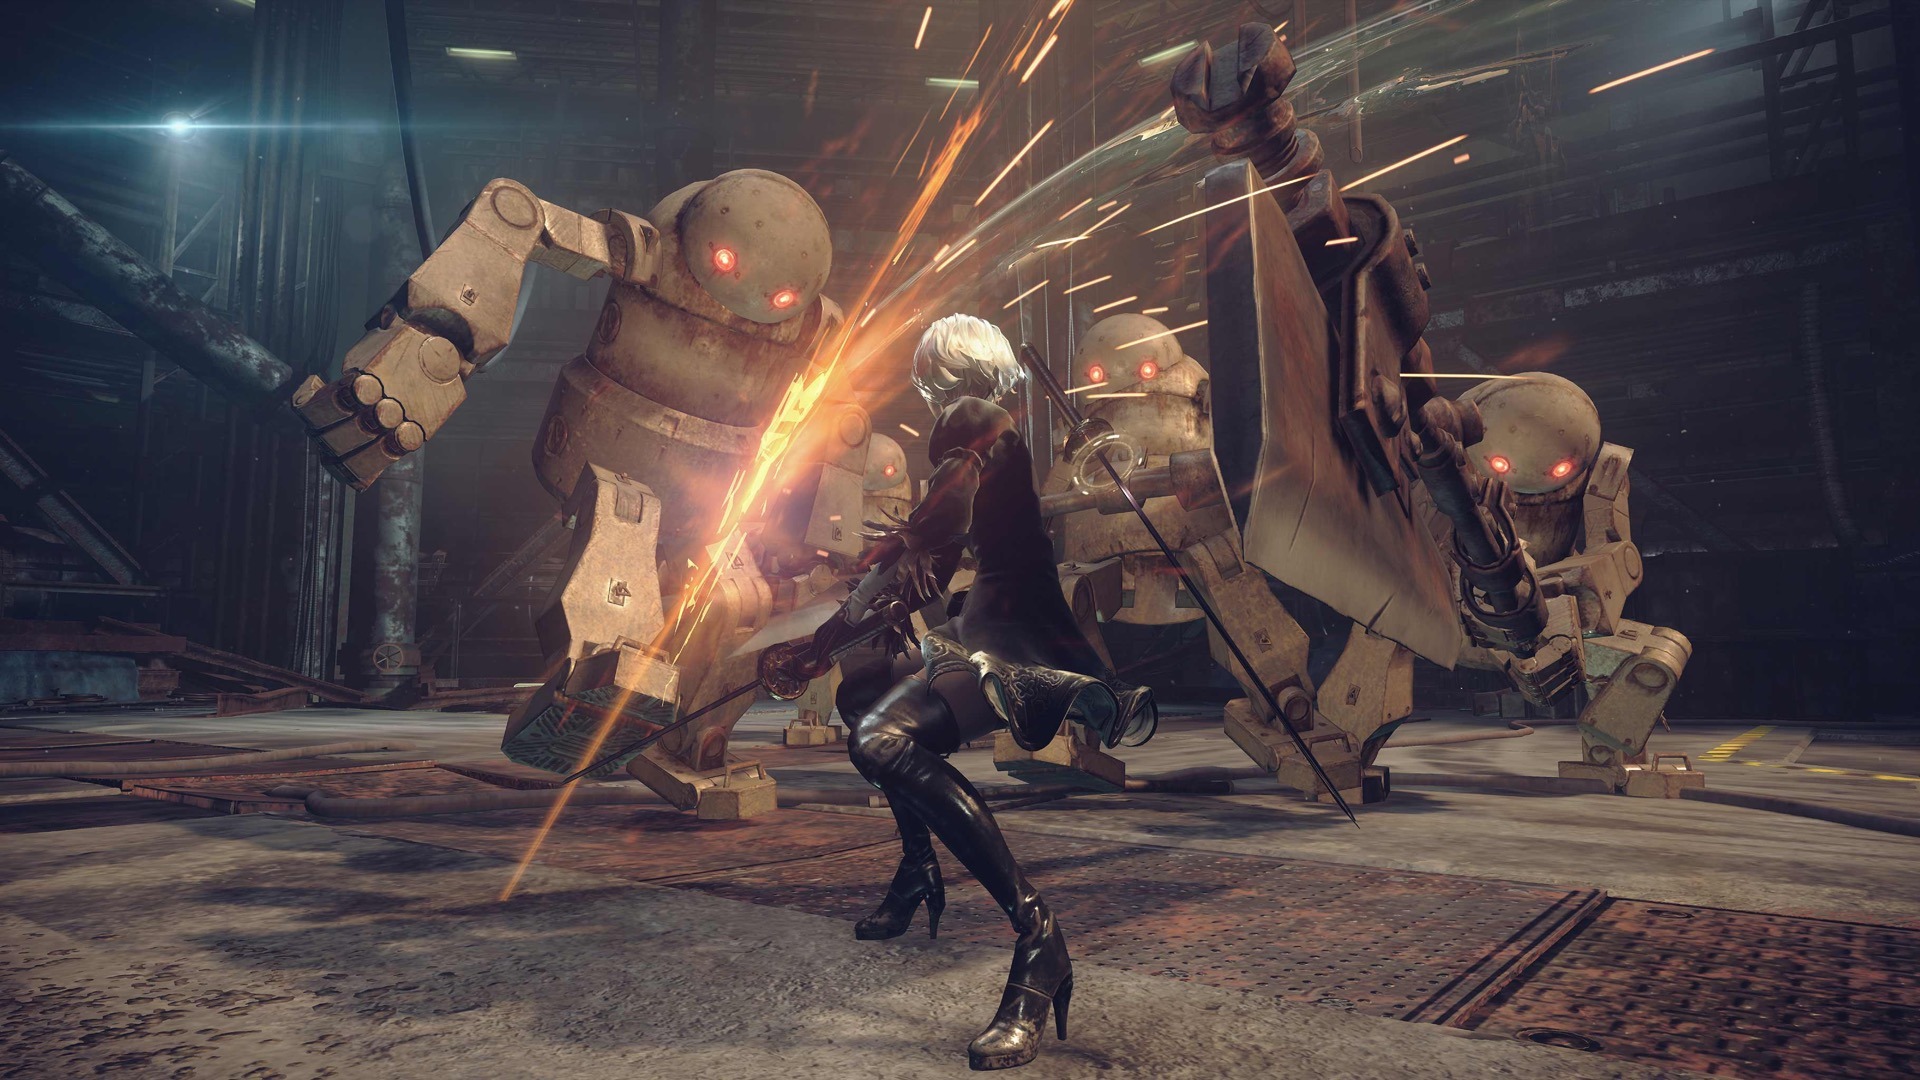 New video from the secret room of NieR: Automata-9S battles a boss